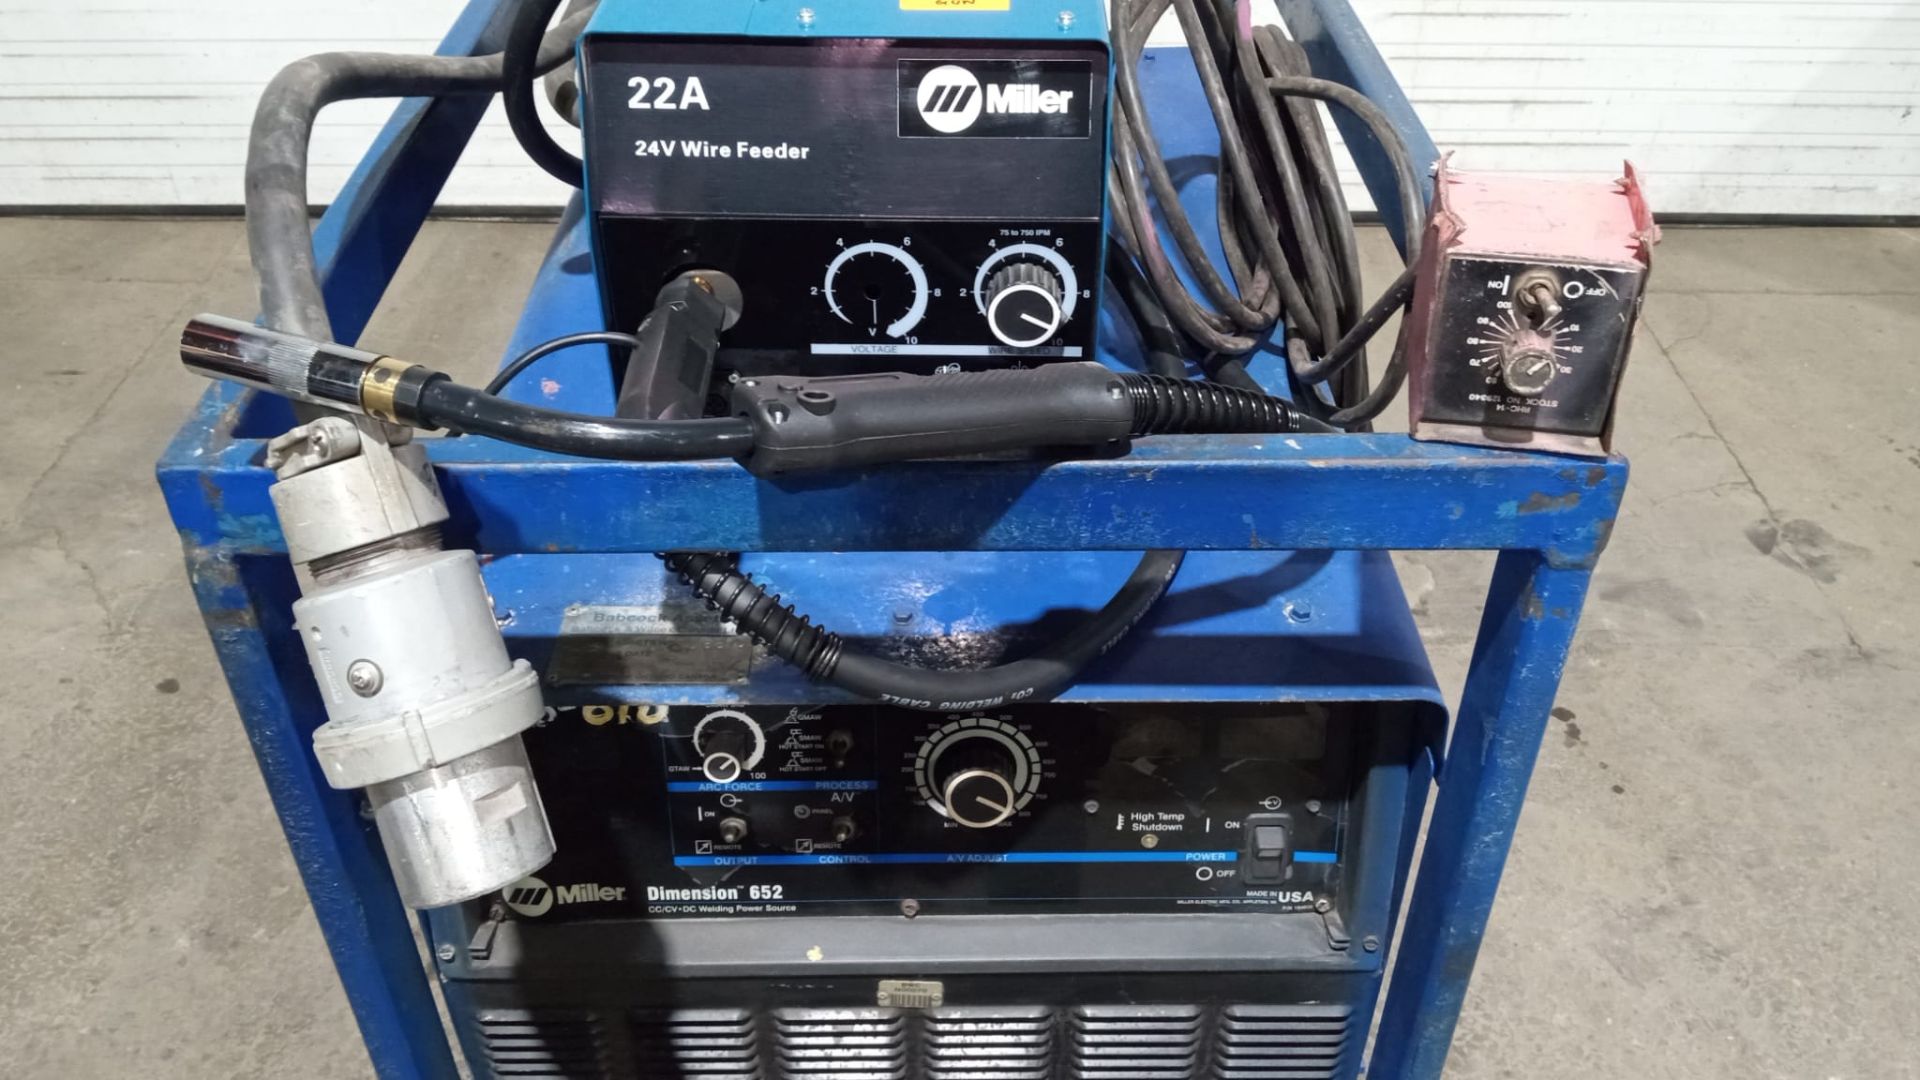 Miller Dimension 652 Mig Welder 650 Amp Mig Tig Stick Multi-Process Power Source with Wire Feeder - Image 2 of 4